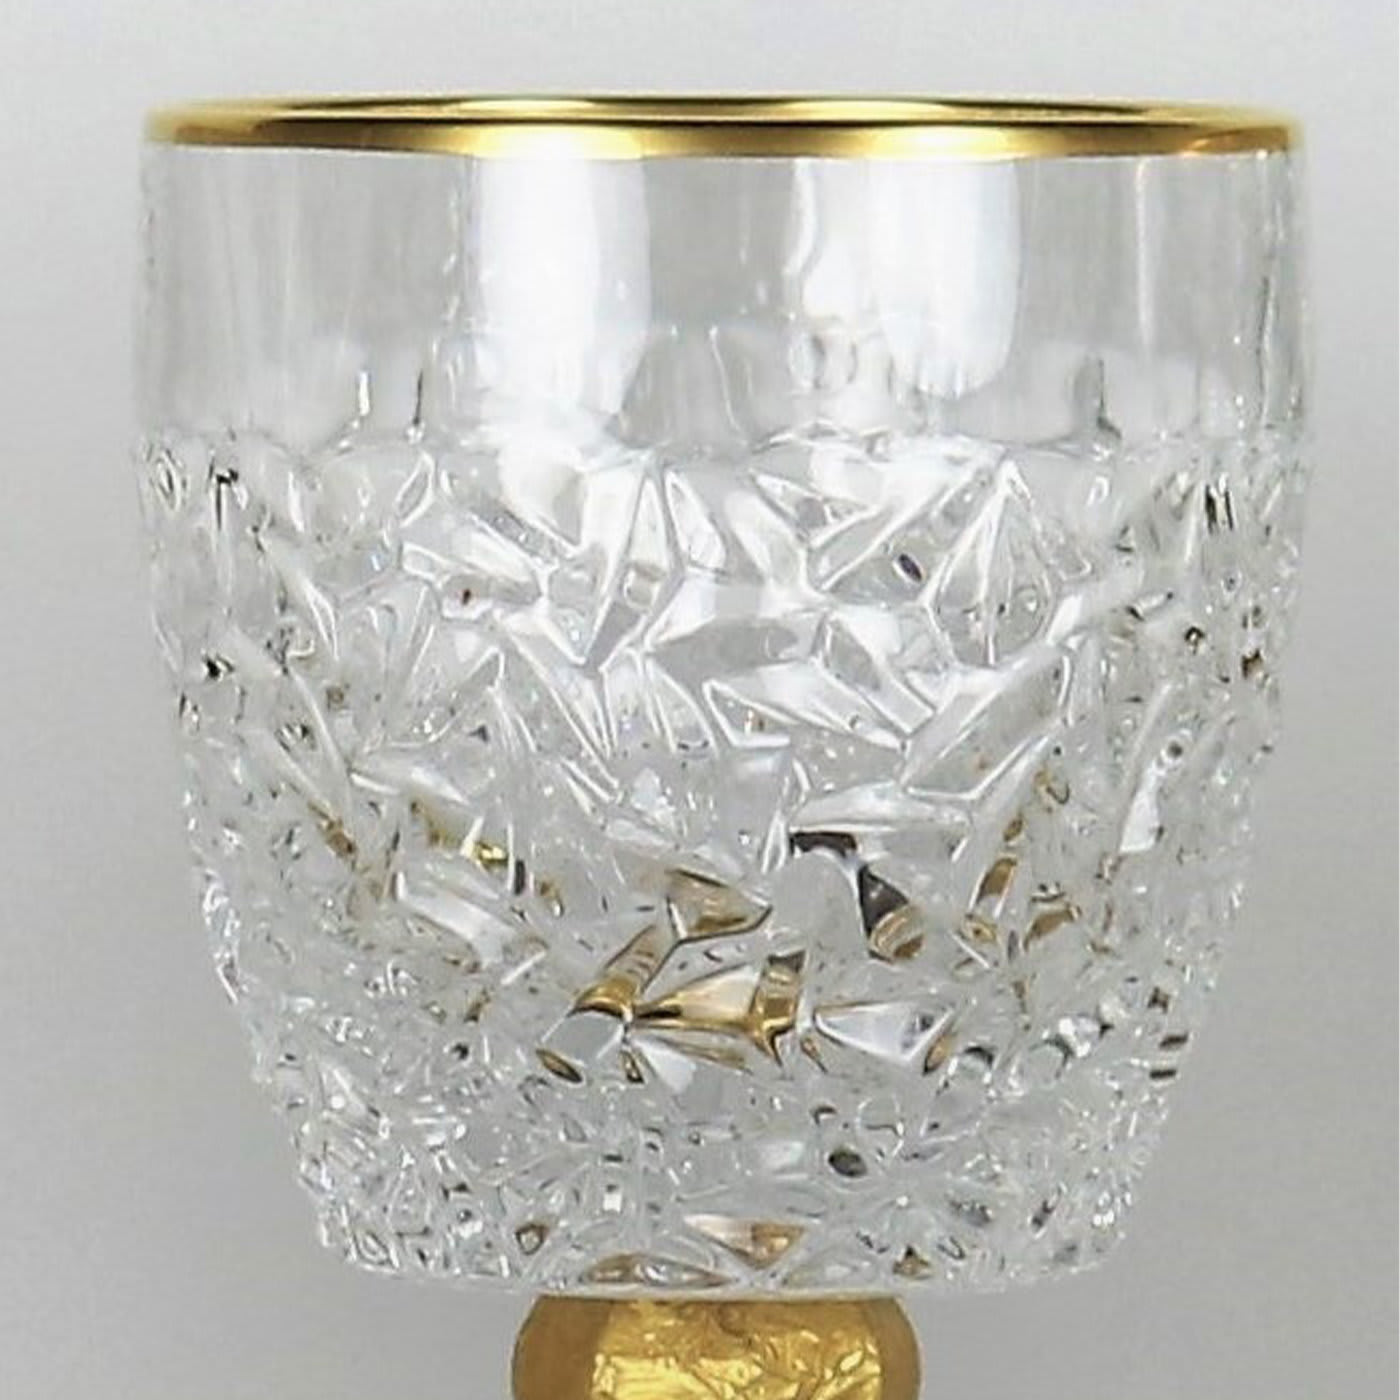 Set of Six Assorted Goblets in Gold - Griffe Montenapoleone by Vetrerie di Empoli